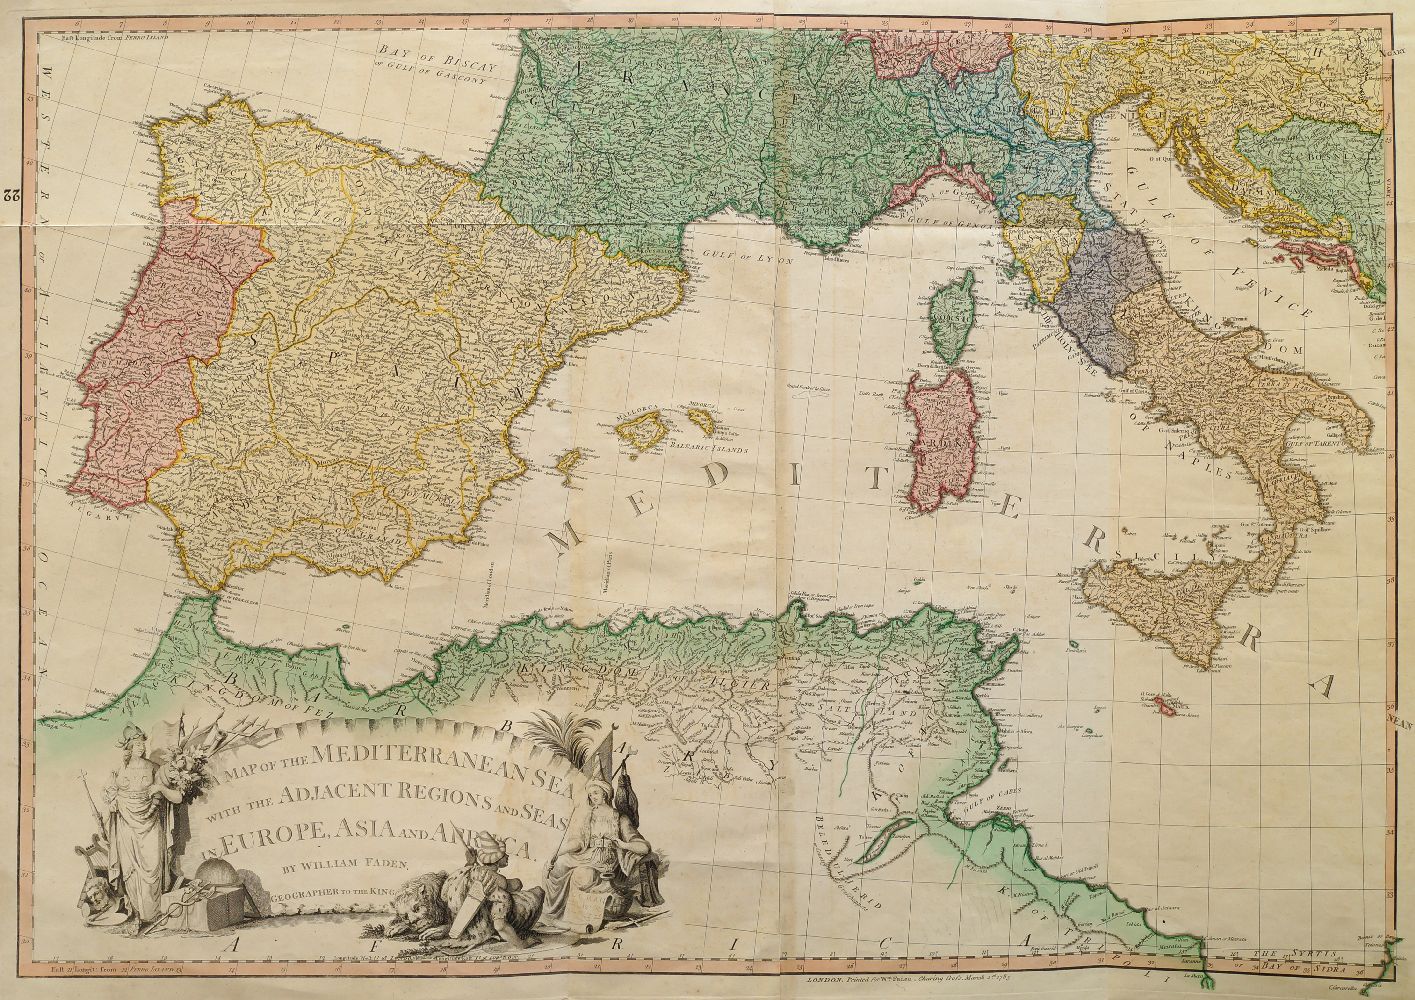 William Faden, British 1749-1836- “A Map of the Mediterranean Sea with the Adjacent Regions and Seas